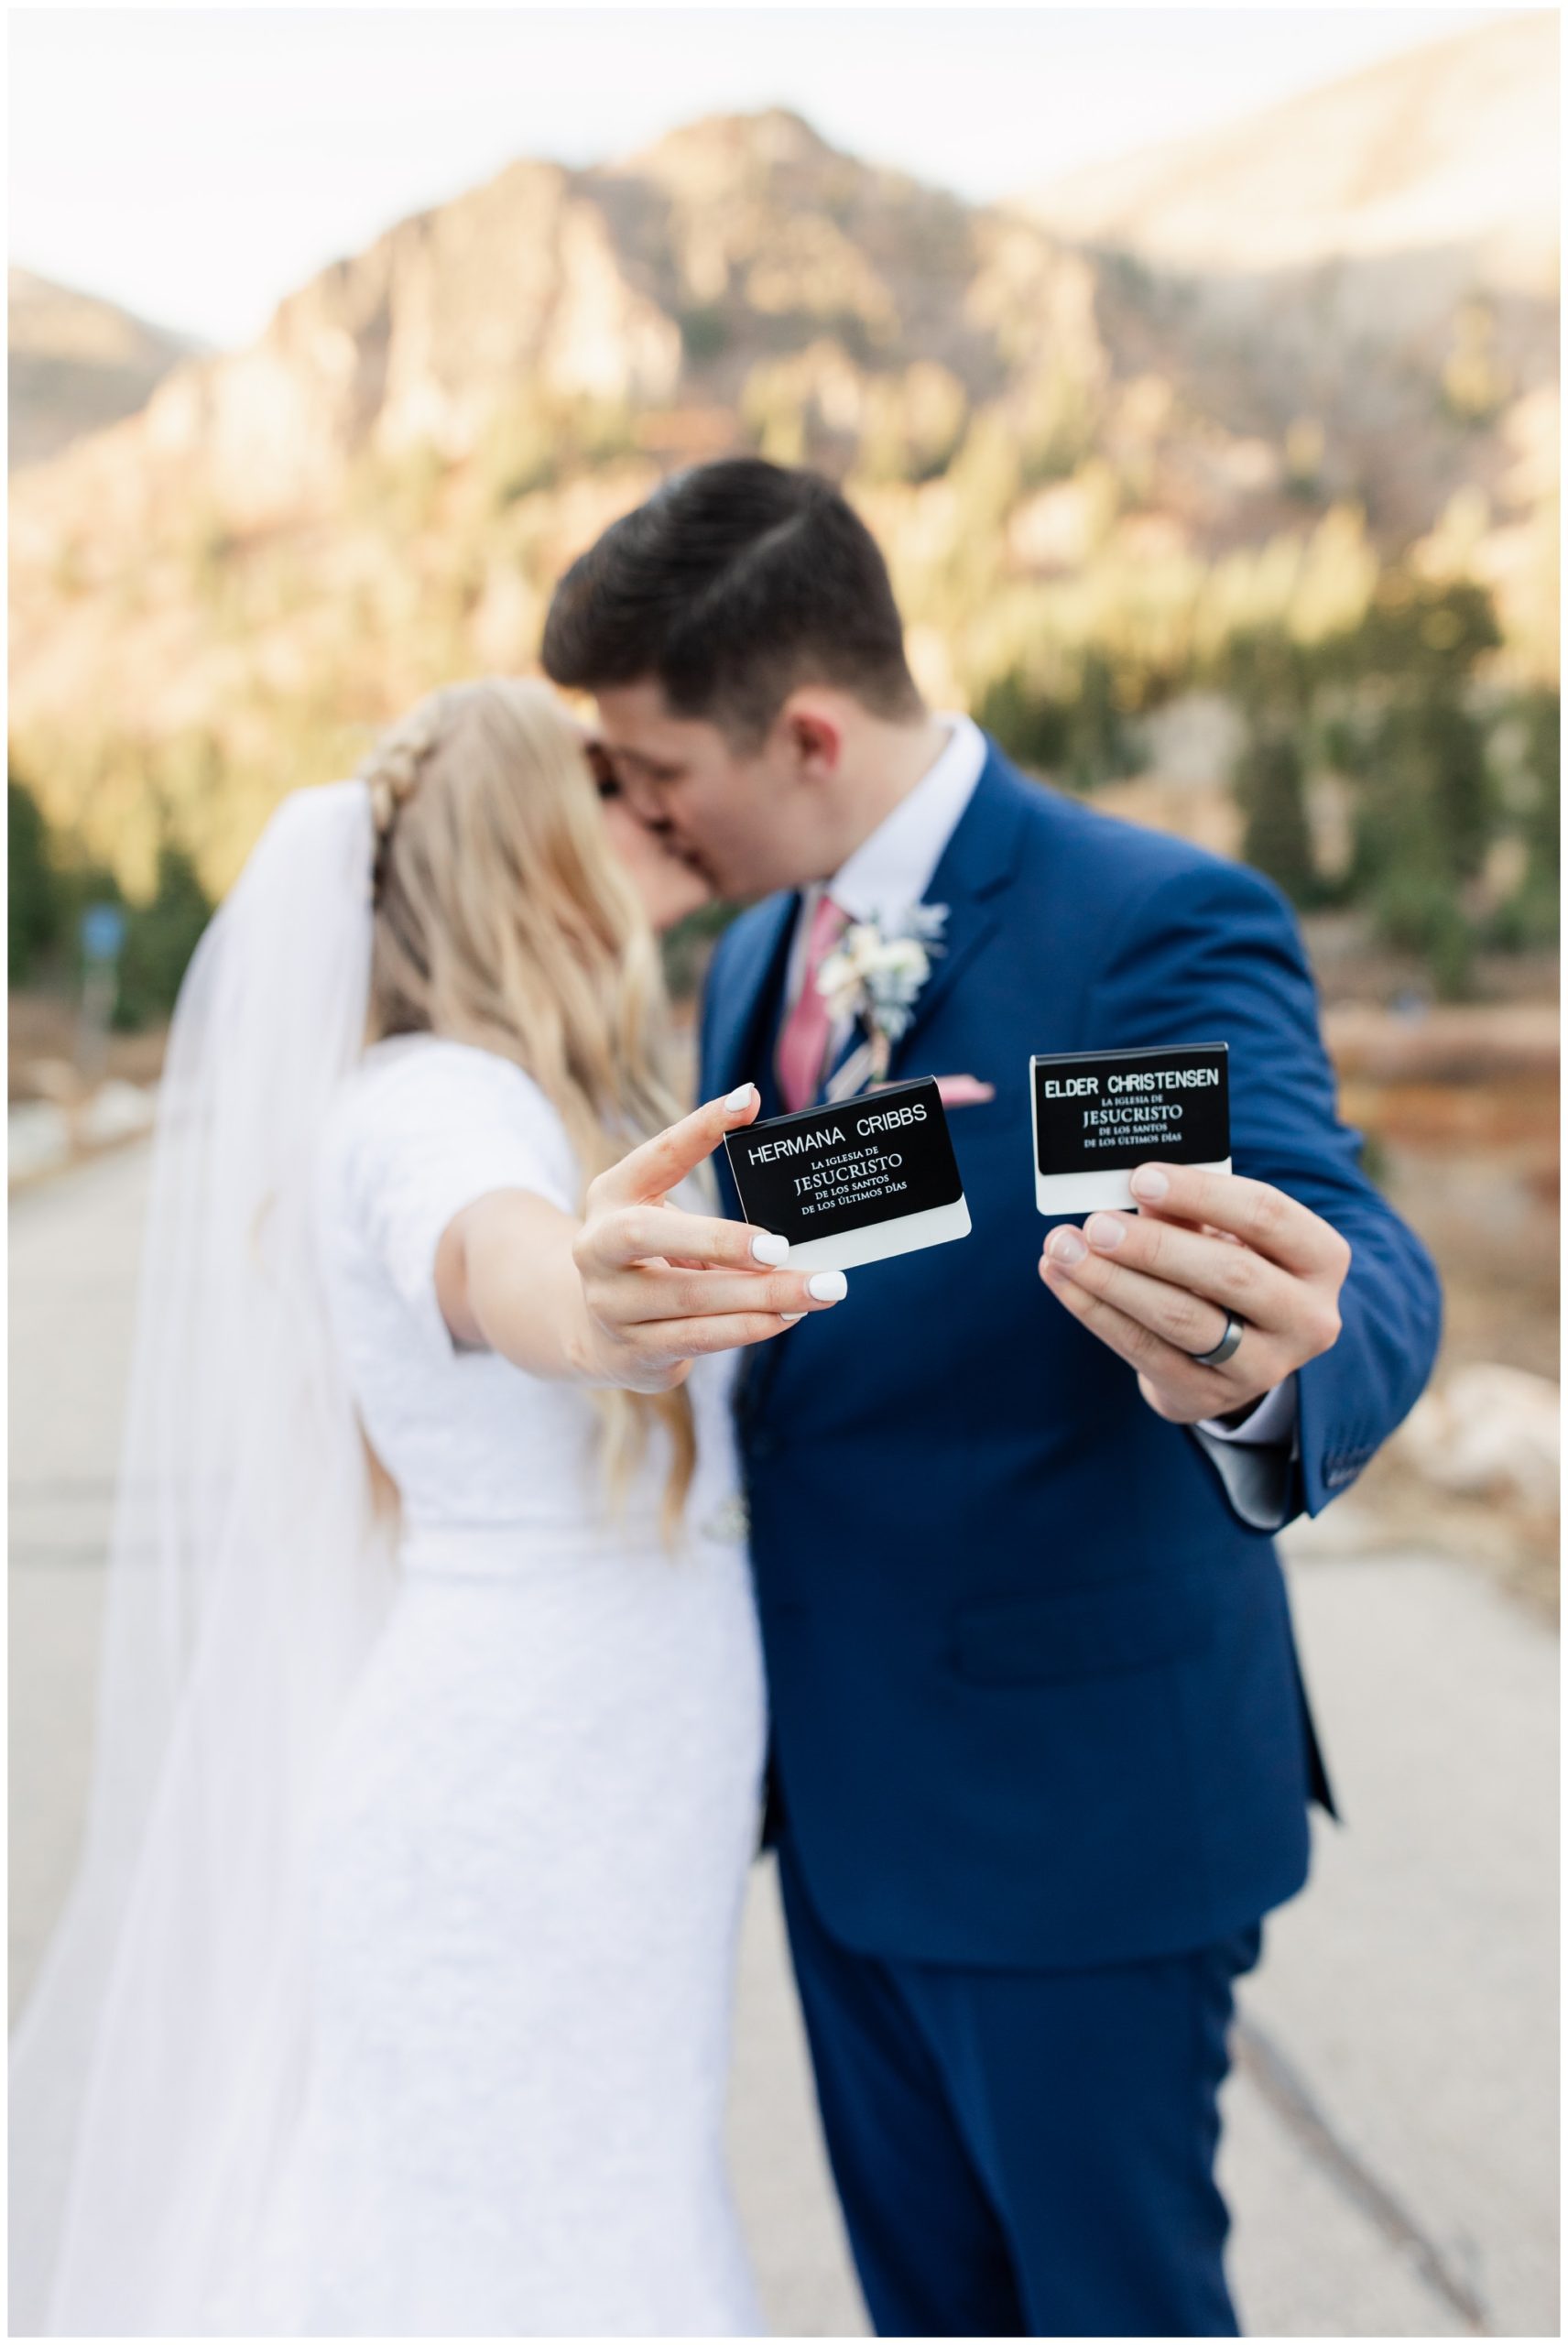 LDS Missionary tags wedding